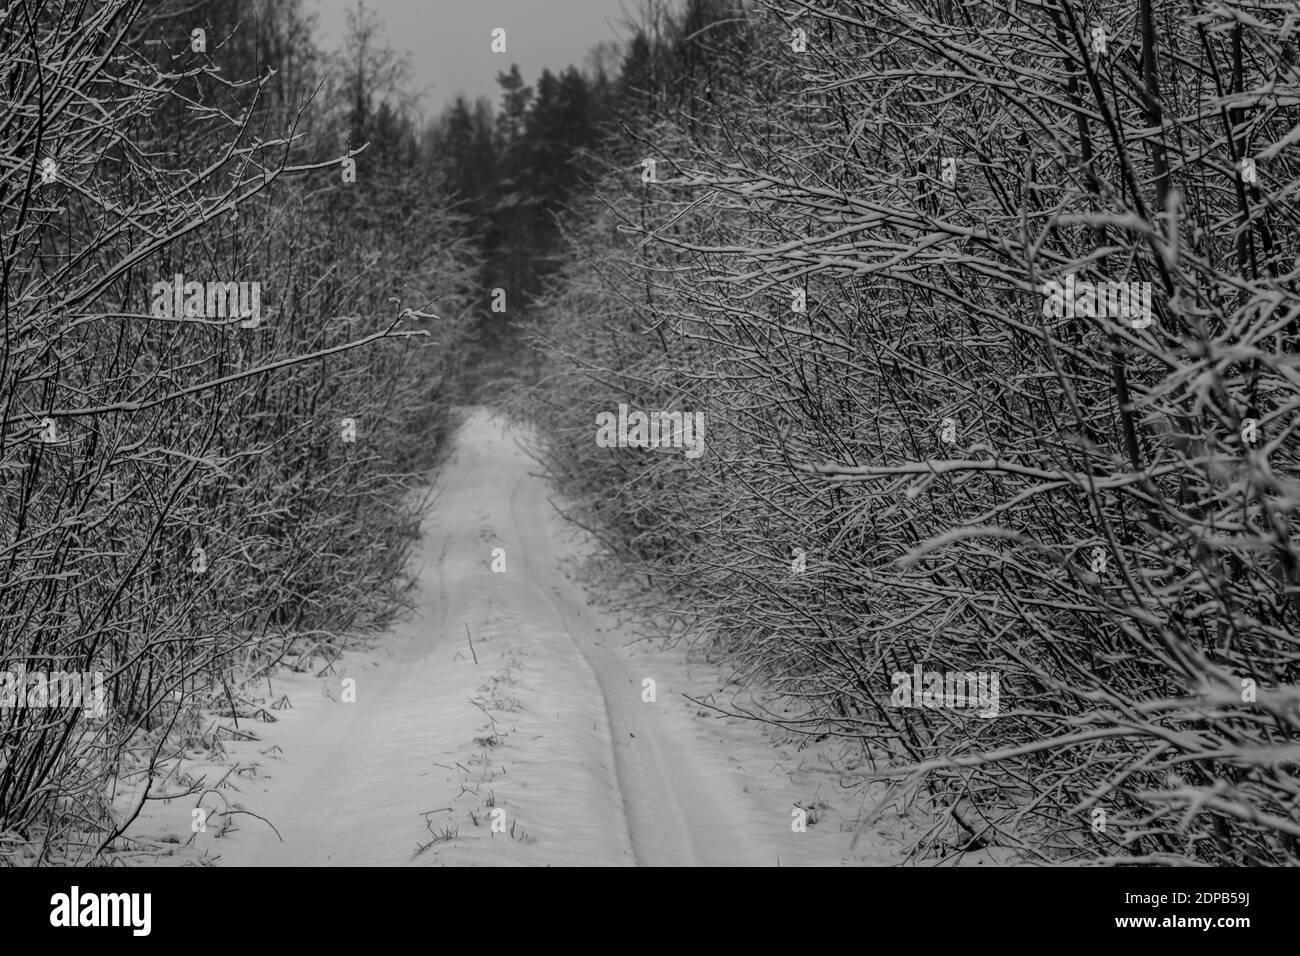 Small road with snow and a lot of bushes on both sides, picture from Vasternorrland Sweden. Stock Photo